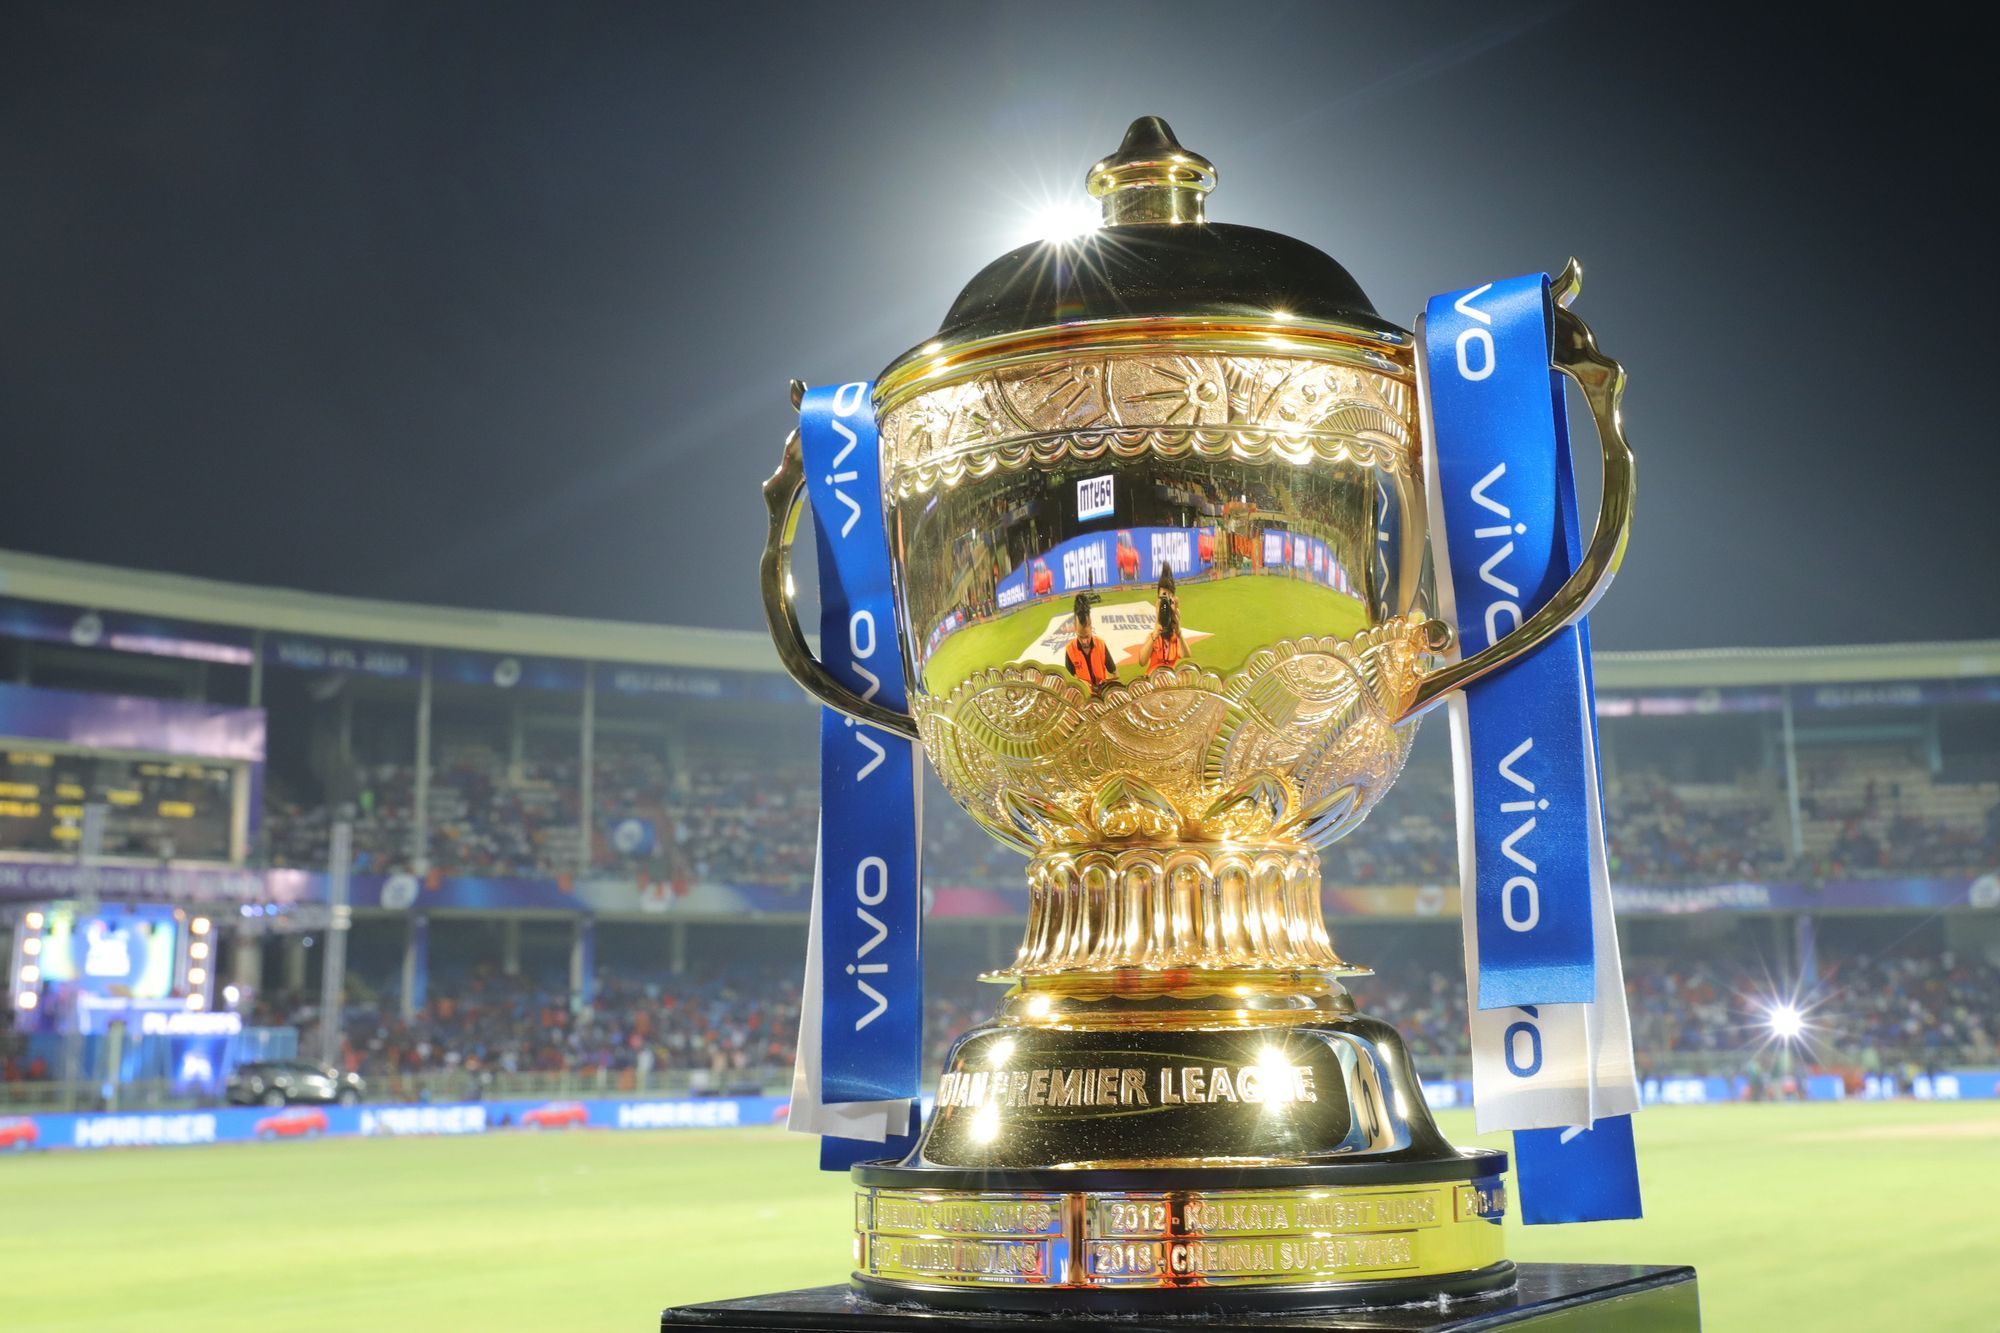 IPL 2020 final to be played on November 10